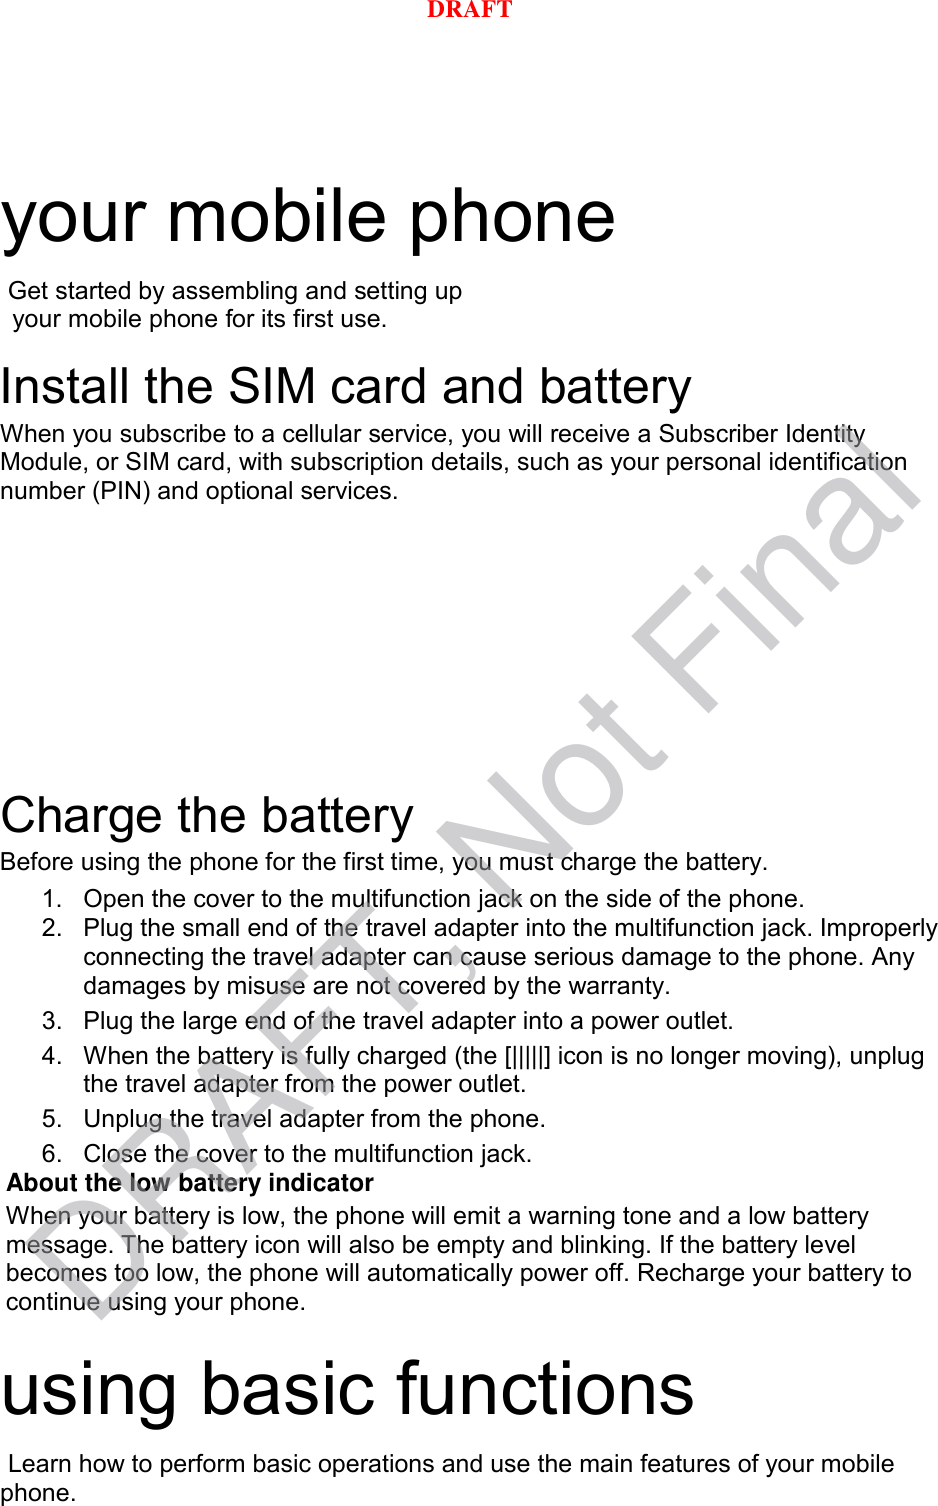 your mobile phone    Get started by assembling and setting up    your mobile phone for its first use.  Install the SIM card and battery When you subscribe to a cellular service, you will receive a Subscriber Identity Module, or SIM card, with subscription details, such as your personal identification number (PIN) and optional services.  Charge the battery Before using the phone for the first time, you must charge the battery. 1. Open the cover to the multifunction jack on the side of the phone. 2. Plug the small end of the travel adapter into the multifunction jack. Improperly connecting the travel adapter can cause serious damage to the phone. Any damages by misuse are not covered by the warranty. 3. Plug the large end of the travel adapter into a power outlet. 4. When the battery is fully charged (the [|||||] icon is no longer moving), unplug the travel adapter from the power outlet. 5. Unplug the travel adapter from the phone. 6. Close the cover to the multifunction jack. About the low battery indicator When your battery is low, the phone will emit a warning tone and a low battery message. The battery icon will also be empty and blinking. If the battery level becomes too low, the phone will automatically power off. Recharge your battery to continue using your phone.  using basic functions  Learn how to perform basic operations and use the main features of your mobile phone.    DRAFT, Not FinalDRAFT